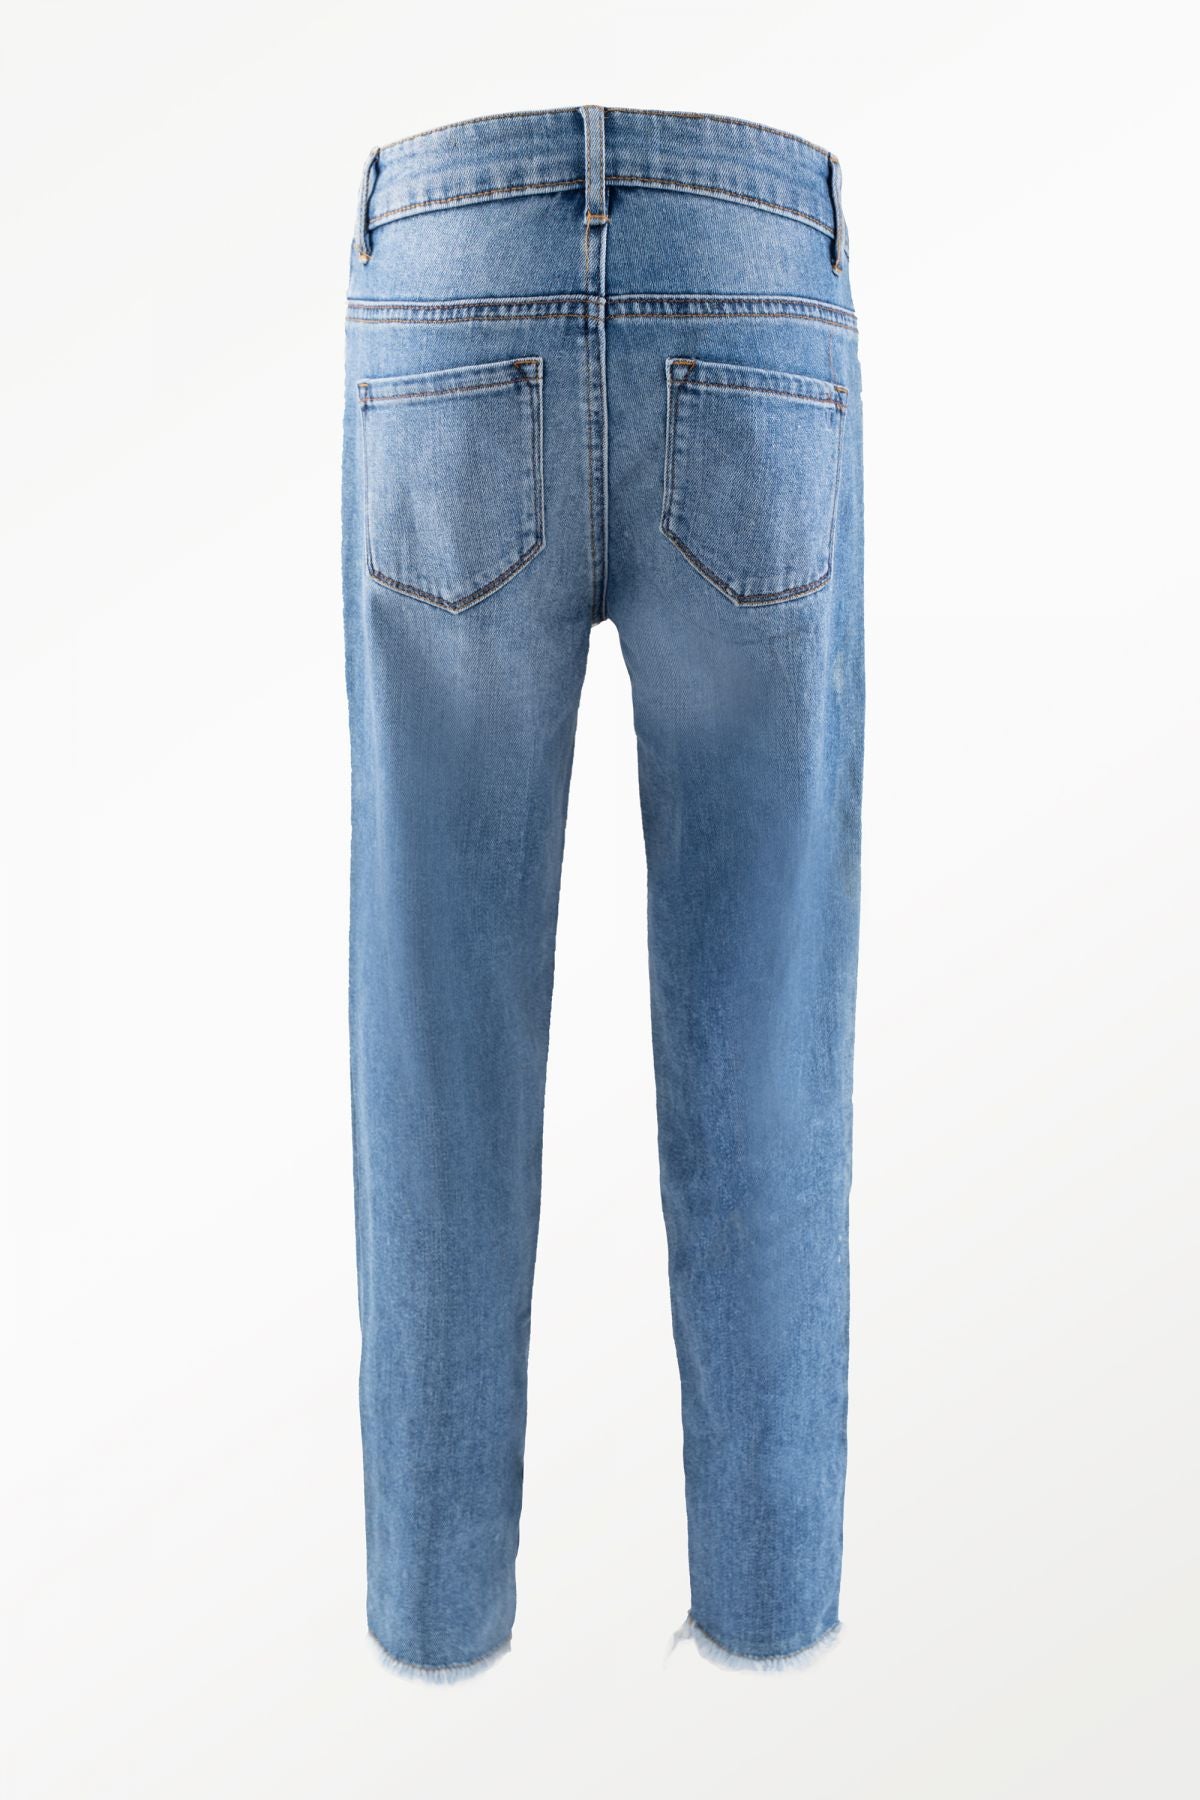 Tractr High Rise Relaxed Fit Weekender Jean